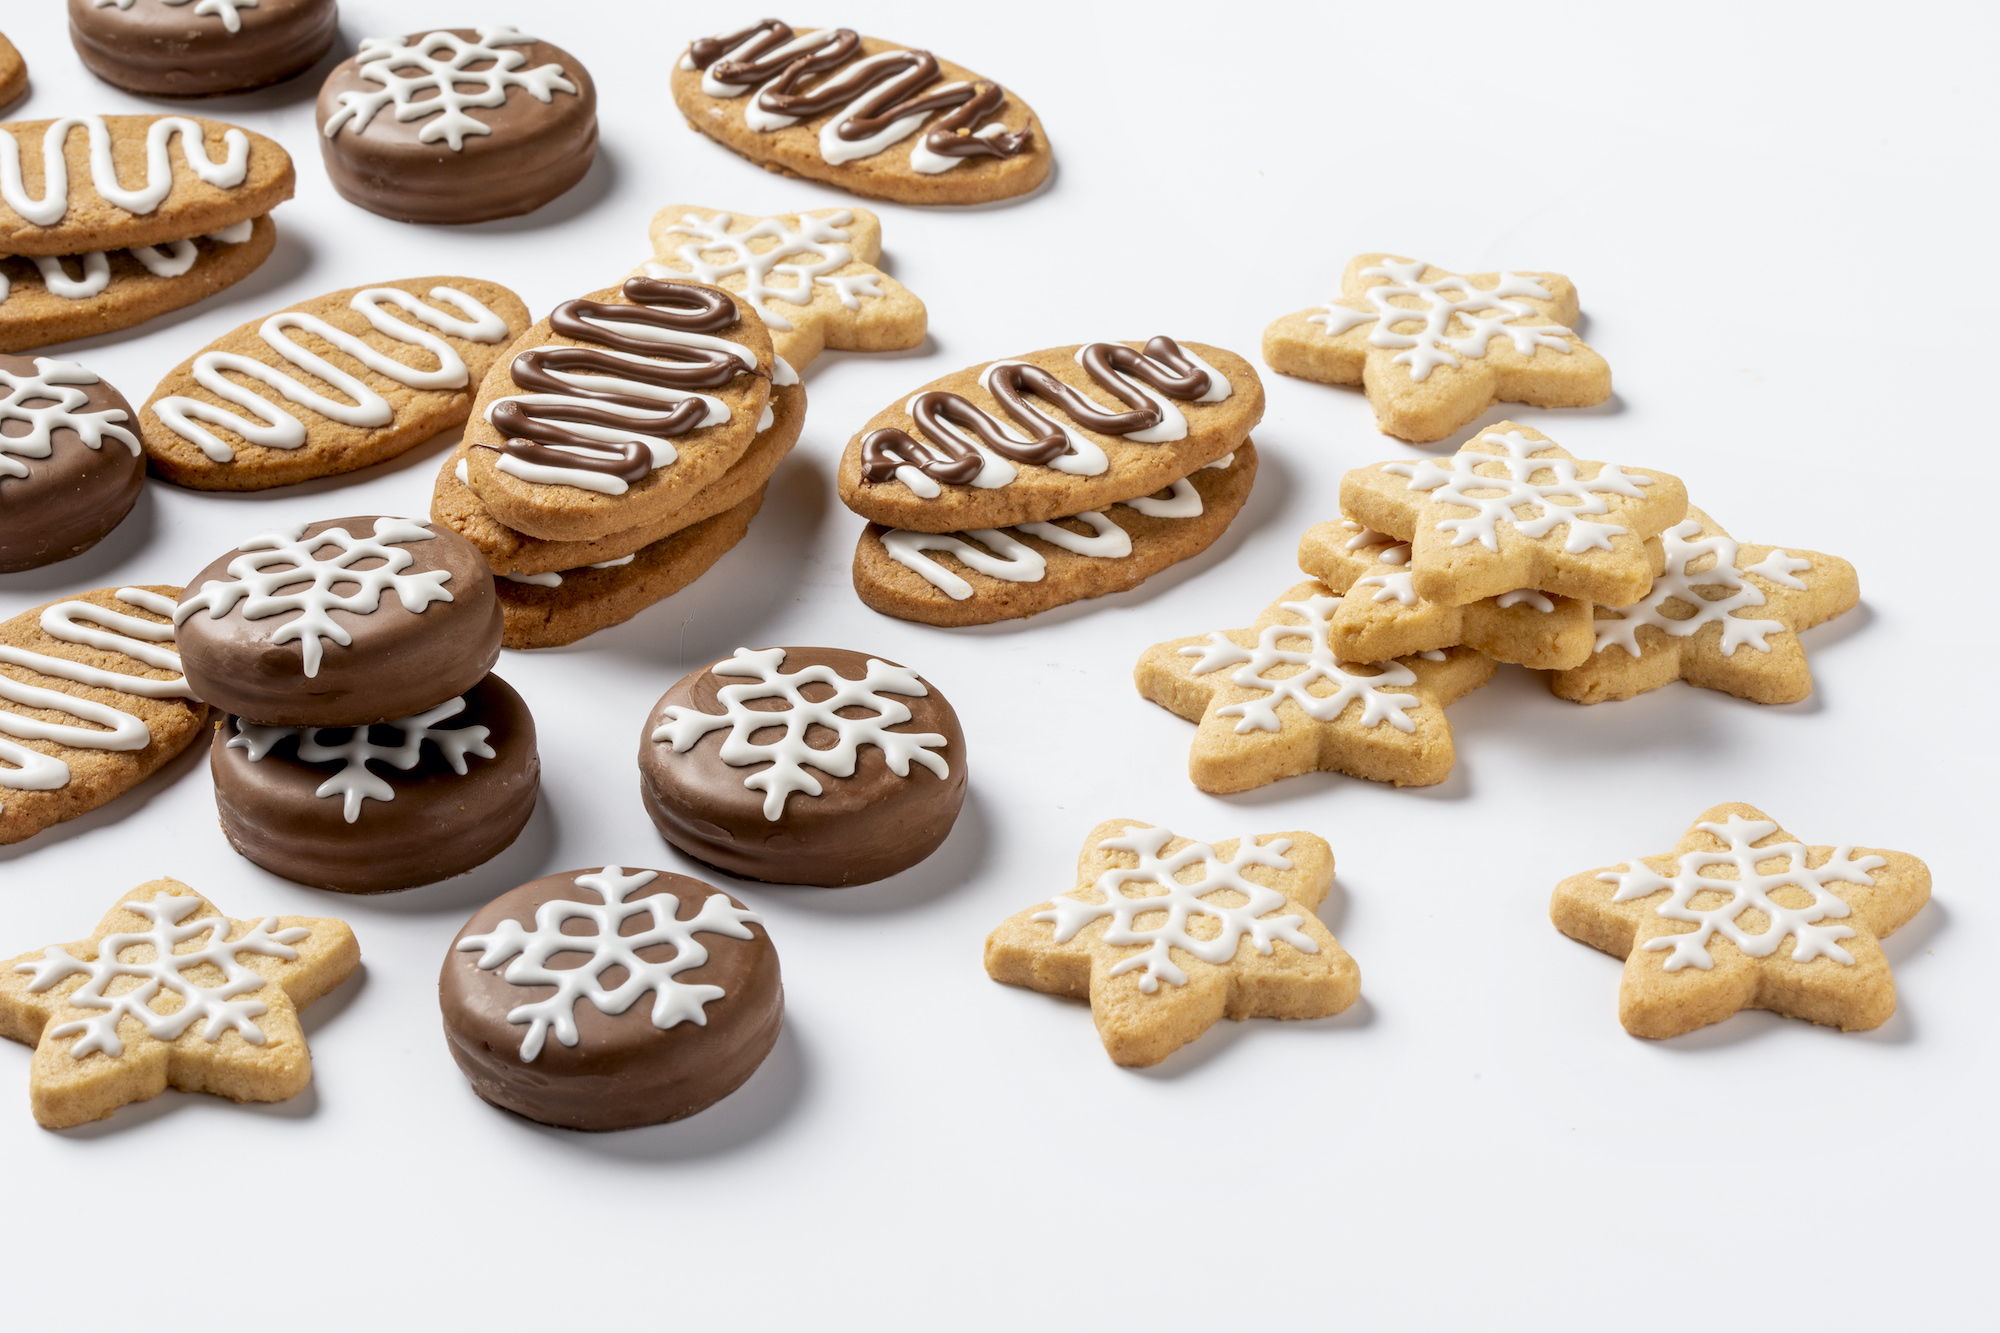 Various shaped biscuits decorated with chocolate by FoodJet chocolate depositing system